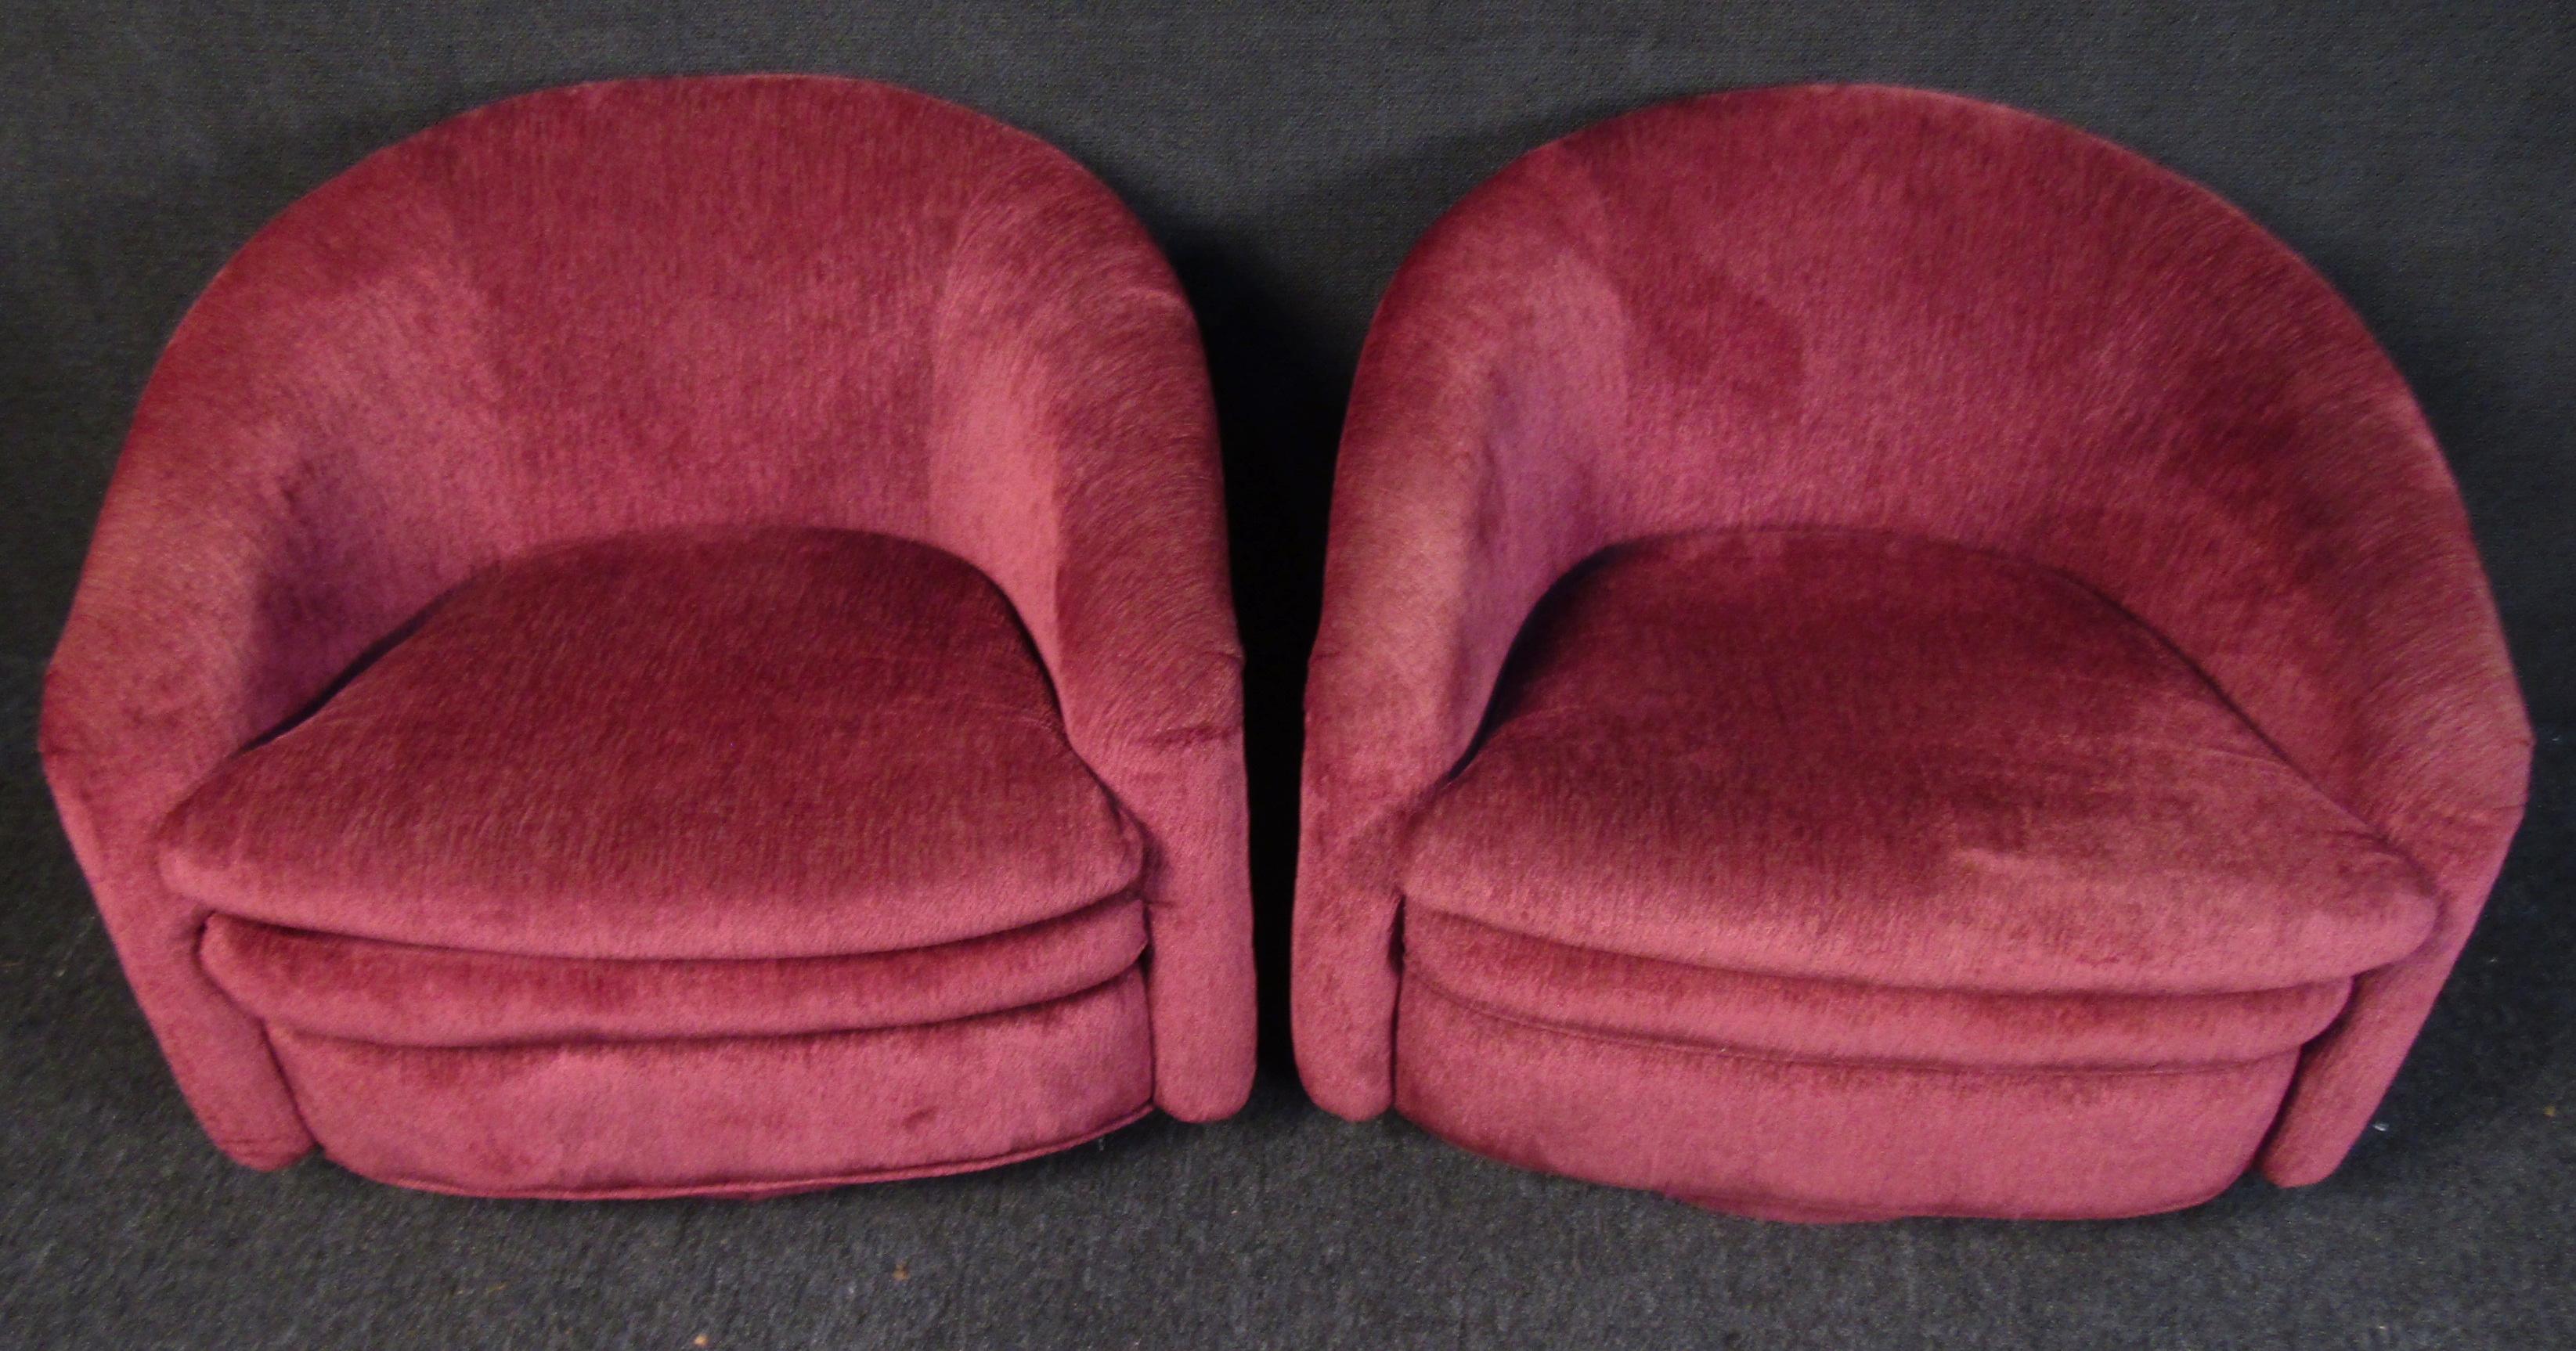 Unique vintage modern lounge chairs. These plushy lounge chairs are upholstered in a vibrant maroon fabric in amazing condition. Swivel bases give added functionality, perfect chairs for entertaining!

Please confirm item location (NY or NJ).